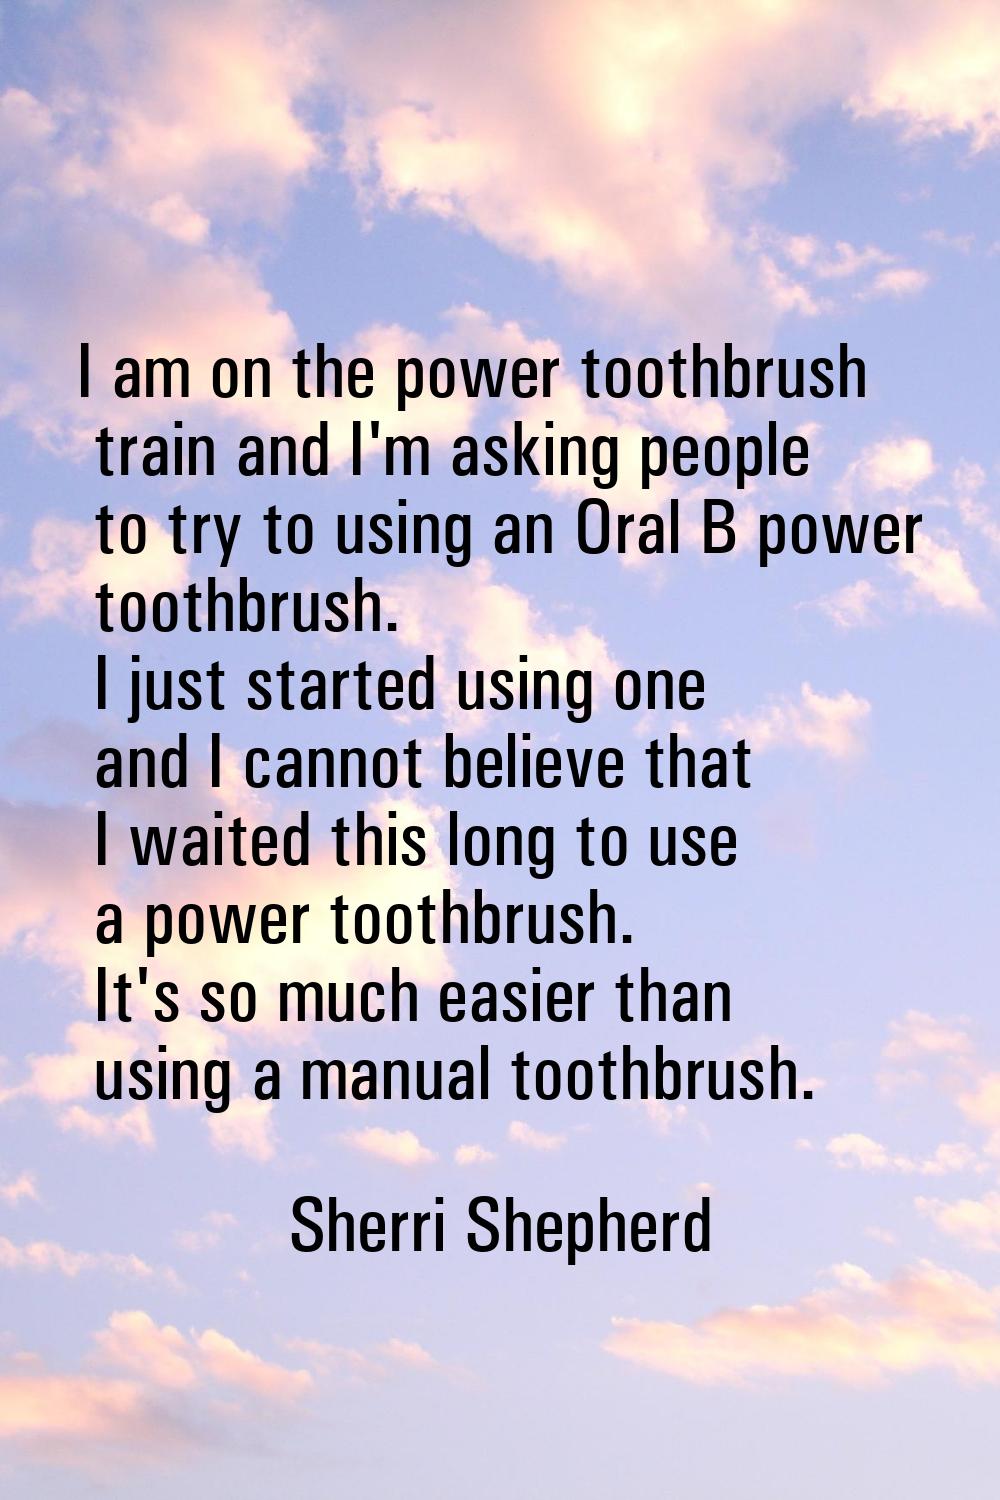 I am on the power toothbrush train and I'm asking people to try to using an Oral B power toothbrush